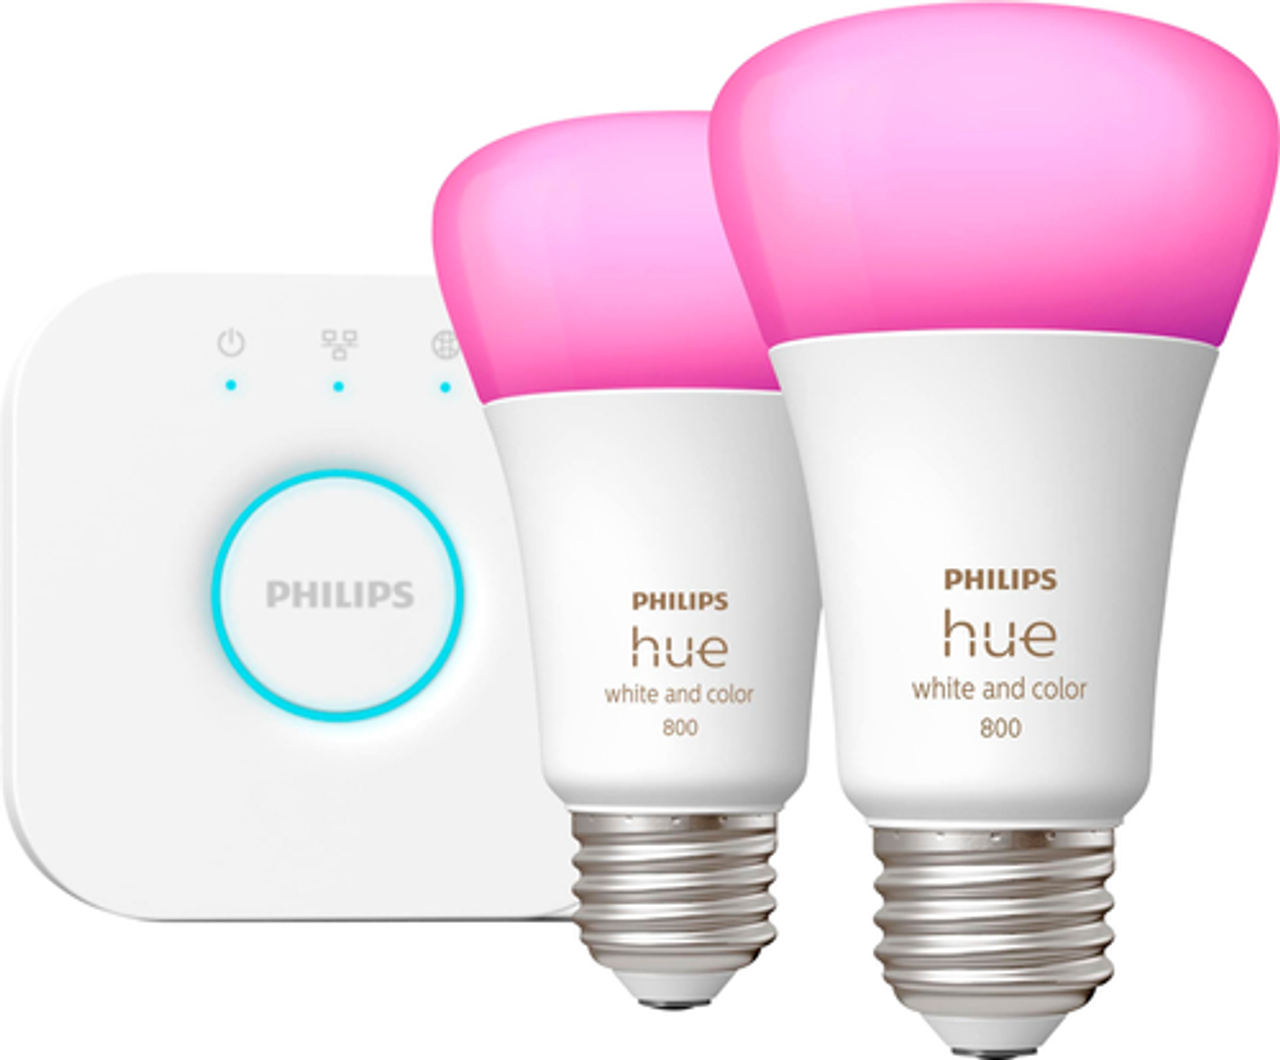 Philips - Hue A19 Bluetooth 60W Smart LED Starter Kit - White and Color Ambiance